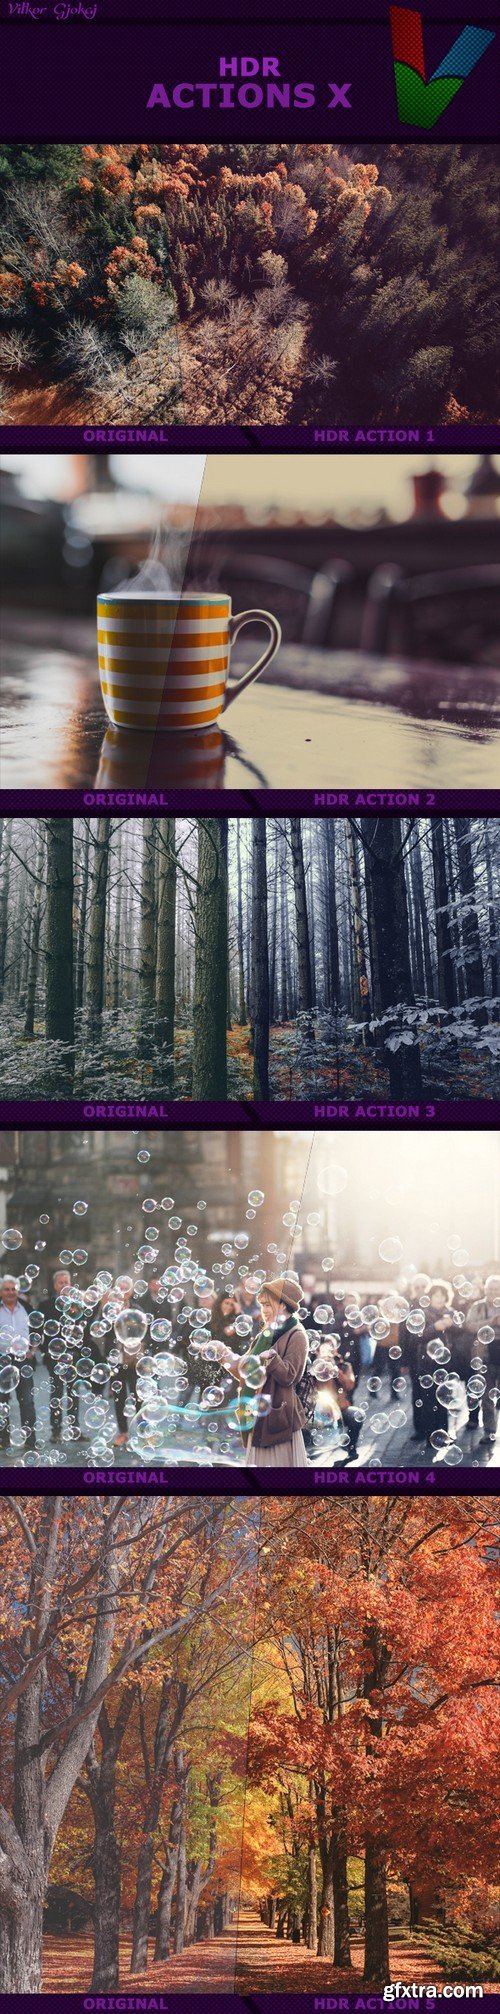 Graphicriver - HDR Actions X 18604144